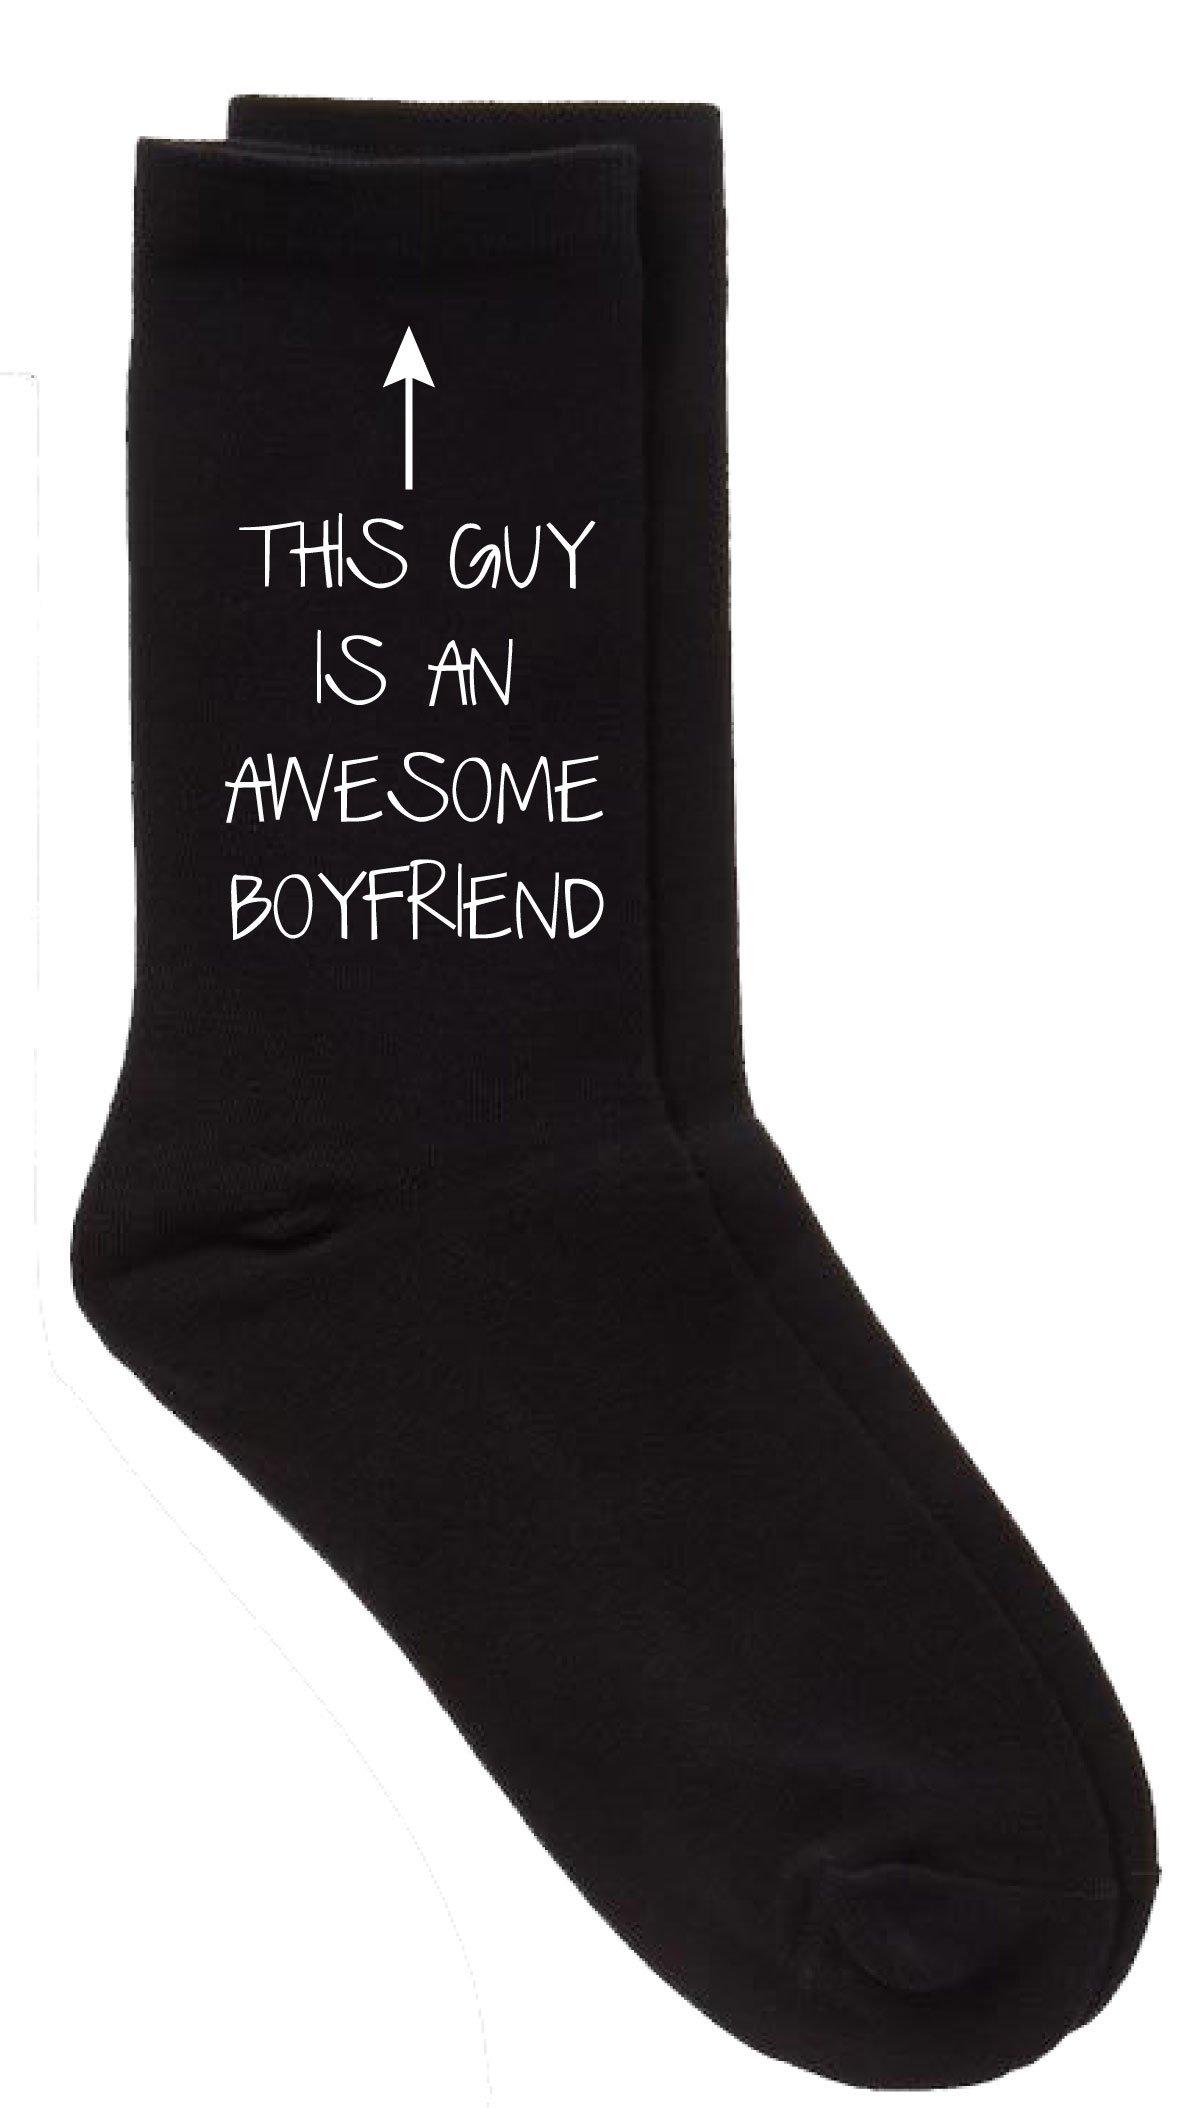 This Guy Is An Awesome Boyfriend Mens Black Socks